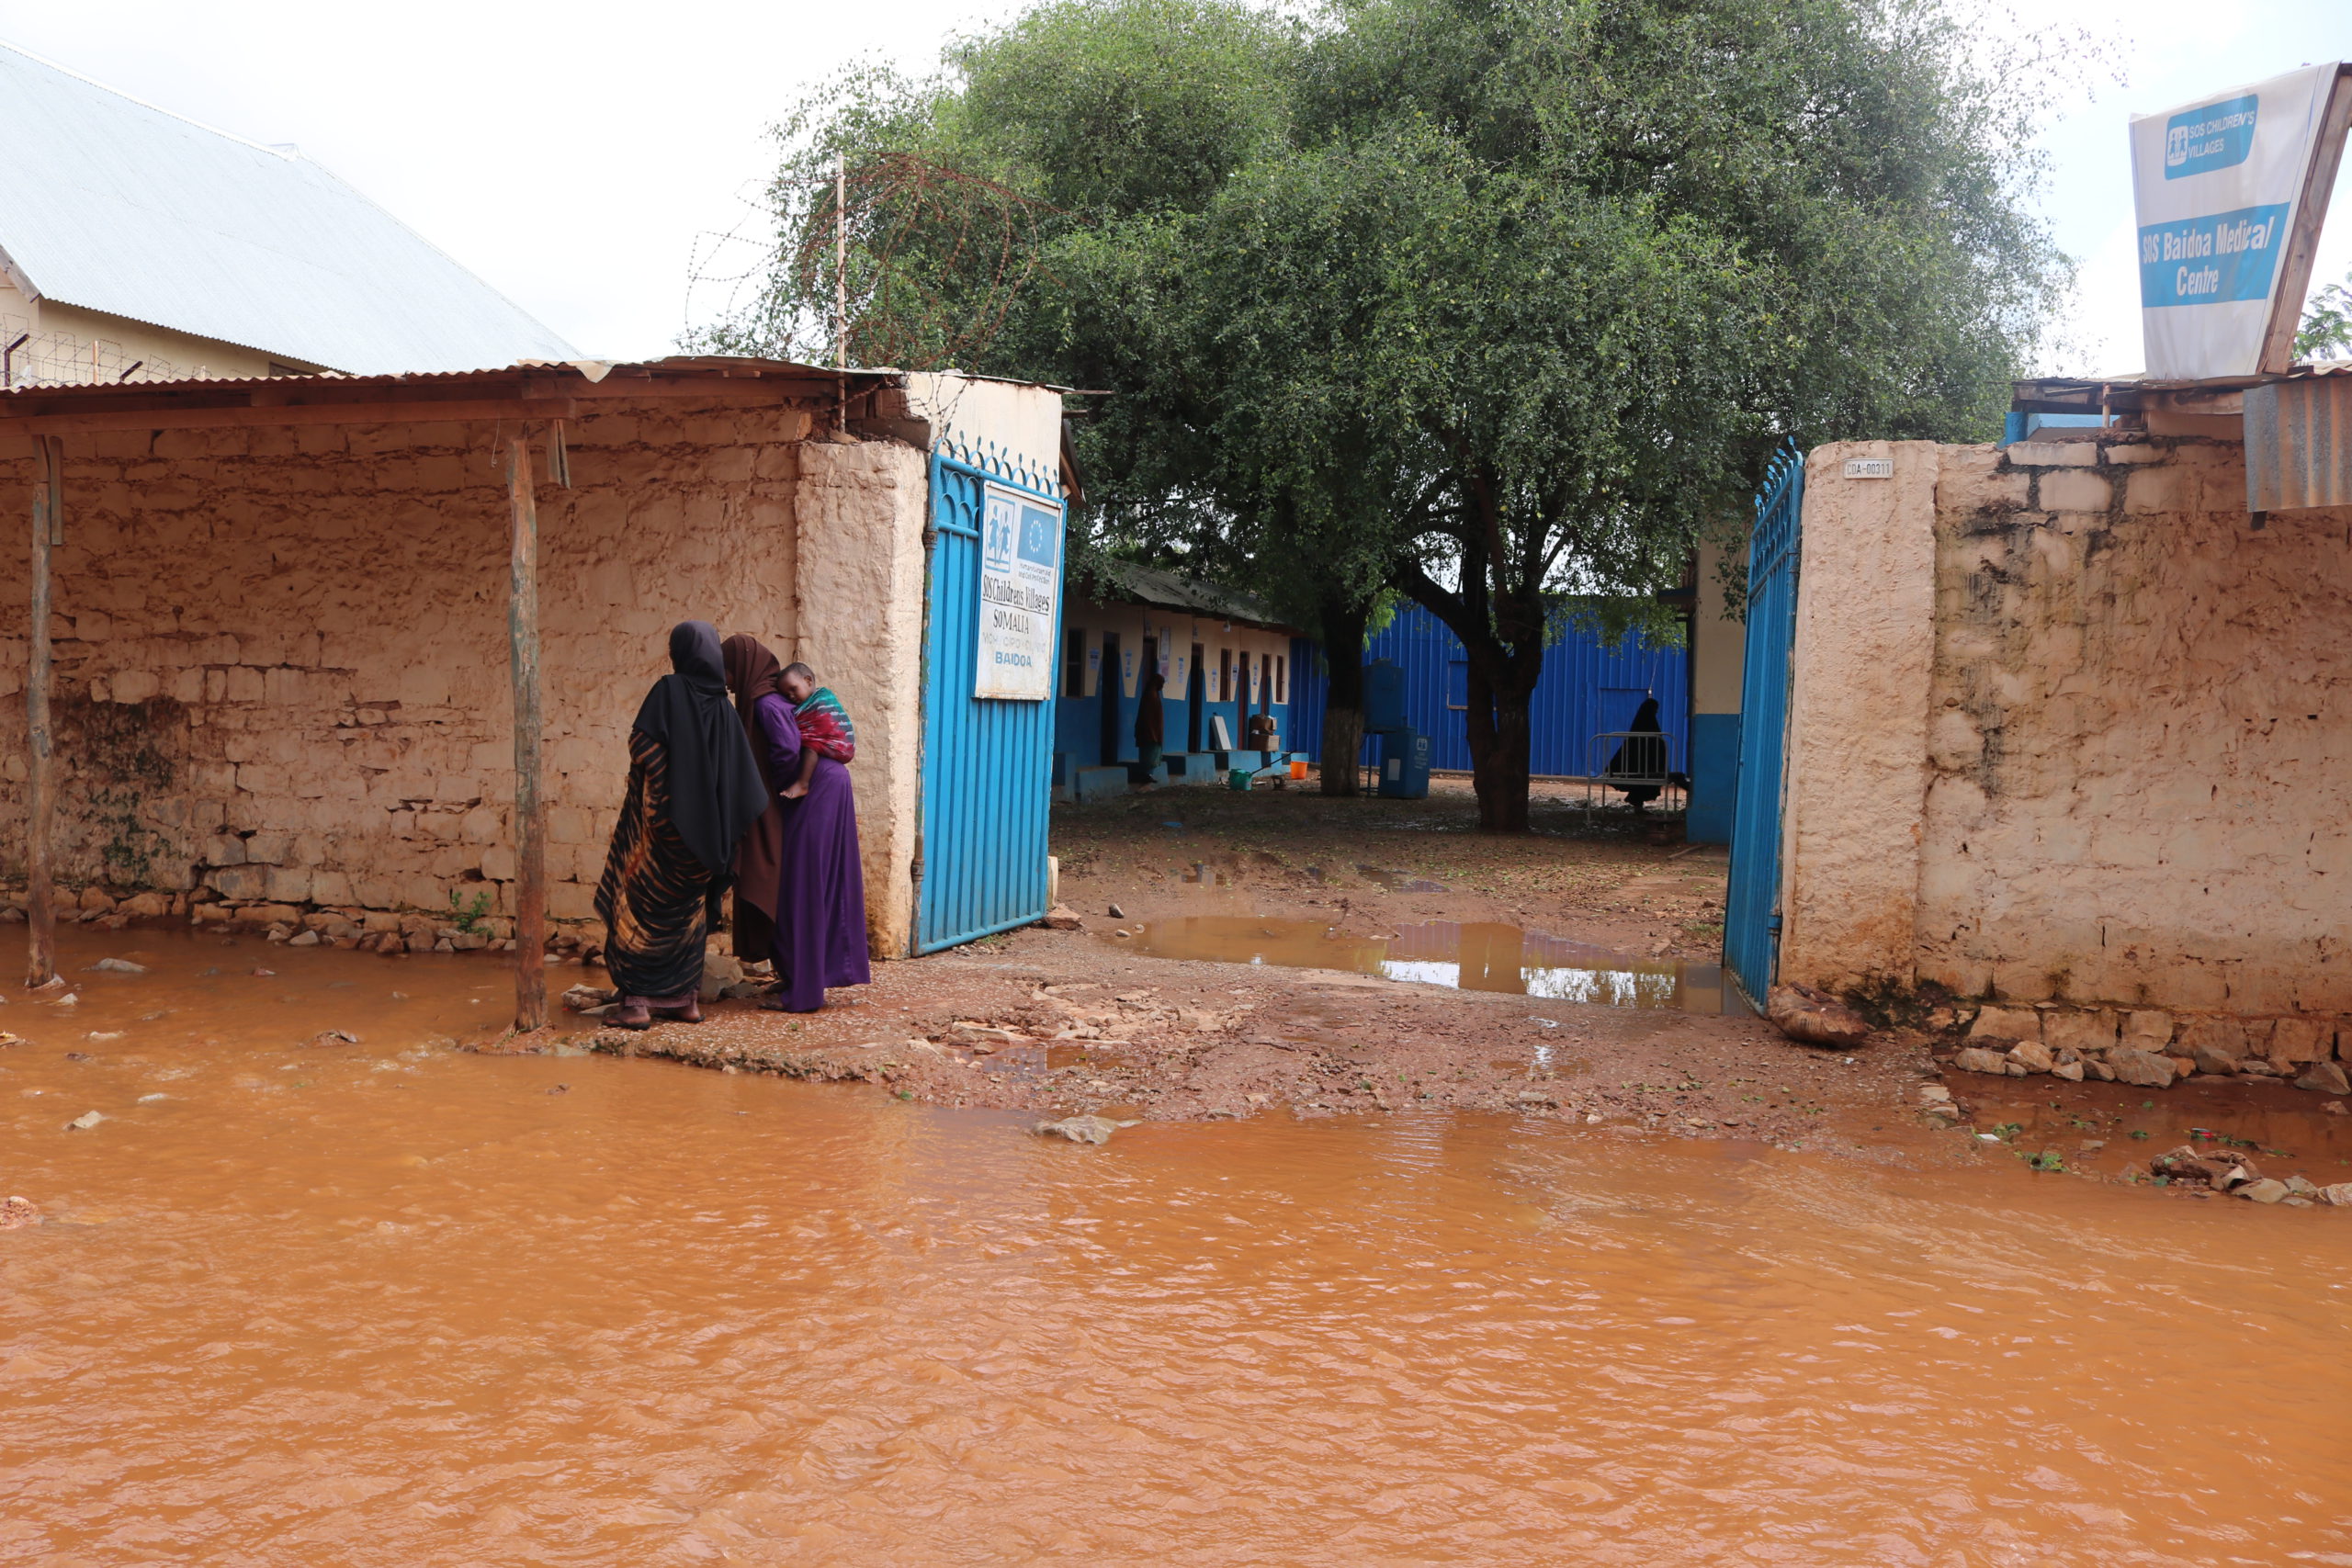 SOS Children's Villages in Baidoa, Somalia, is flooded due to heavy rain in the Horn of Africa.